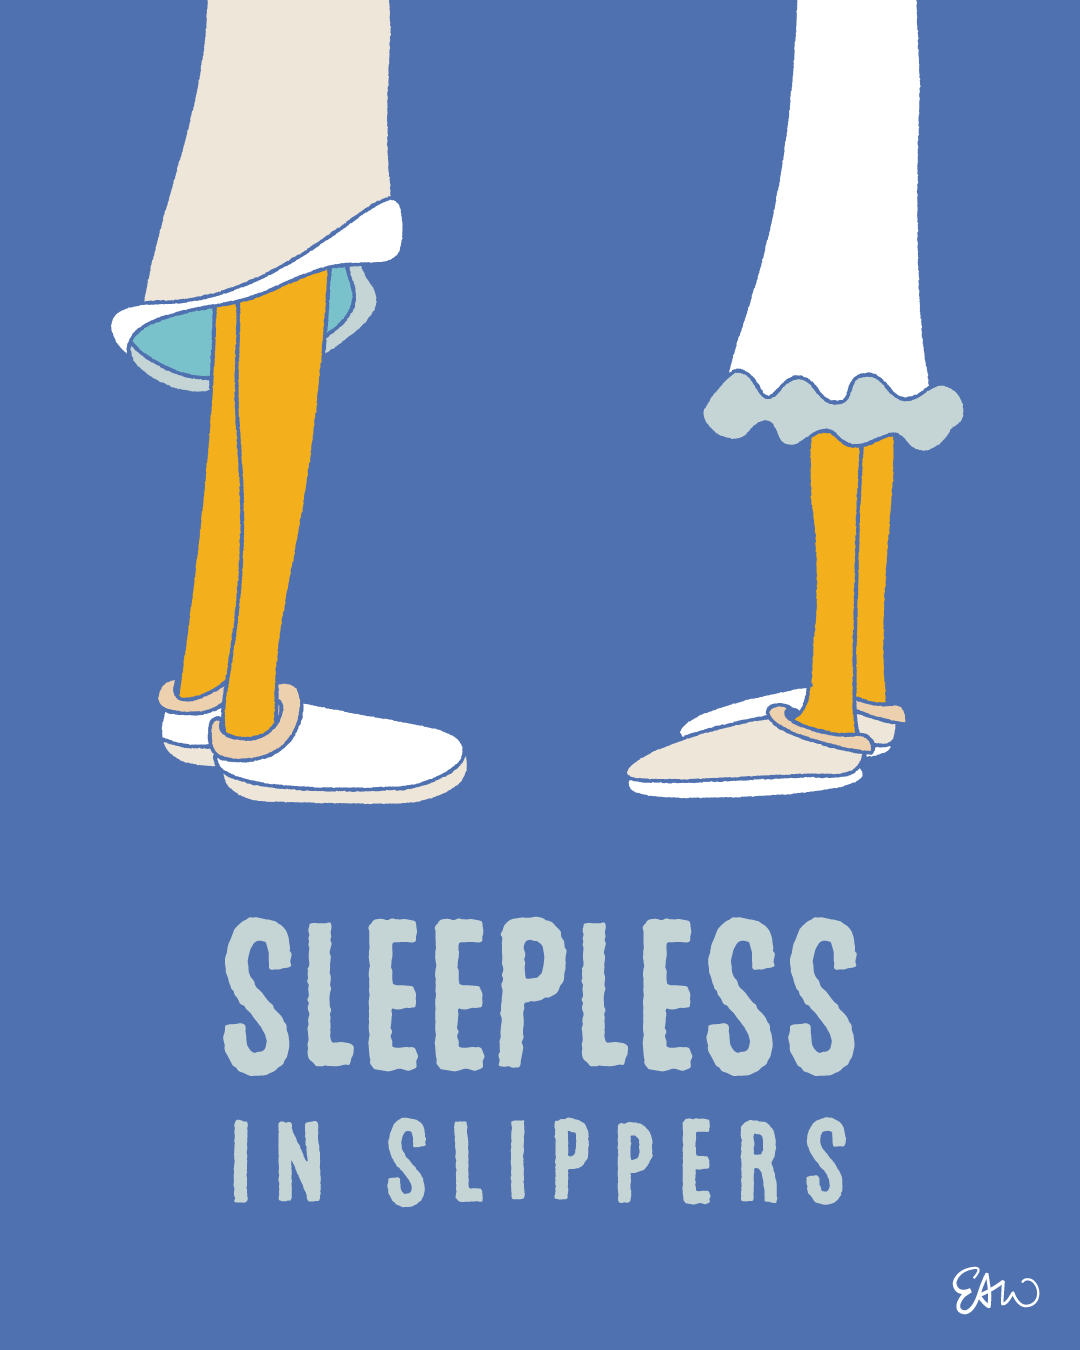 Cartoon illustration drawn in a retro style with a minimal palette of faded blues, teals and yellows with halftones for shading. Two characters stand facing each other, but only their night gowns, legs, and slippers appear in the composition. The caption underneath is style in the same font treatment as the original “Sleepless in Seattle” movie poster, but instead it reads, “Sleepless in Slippers.”